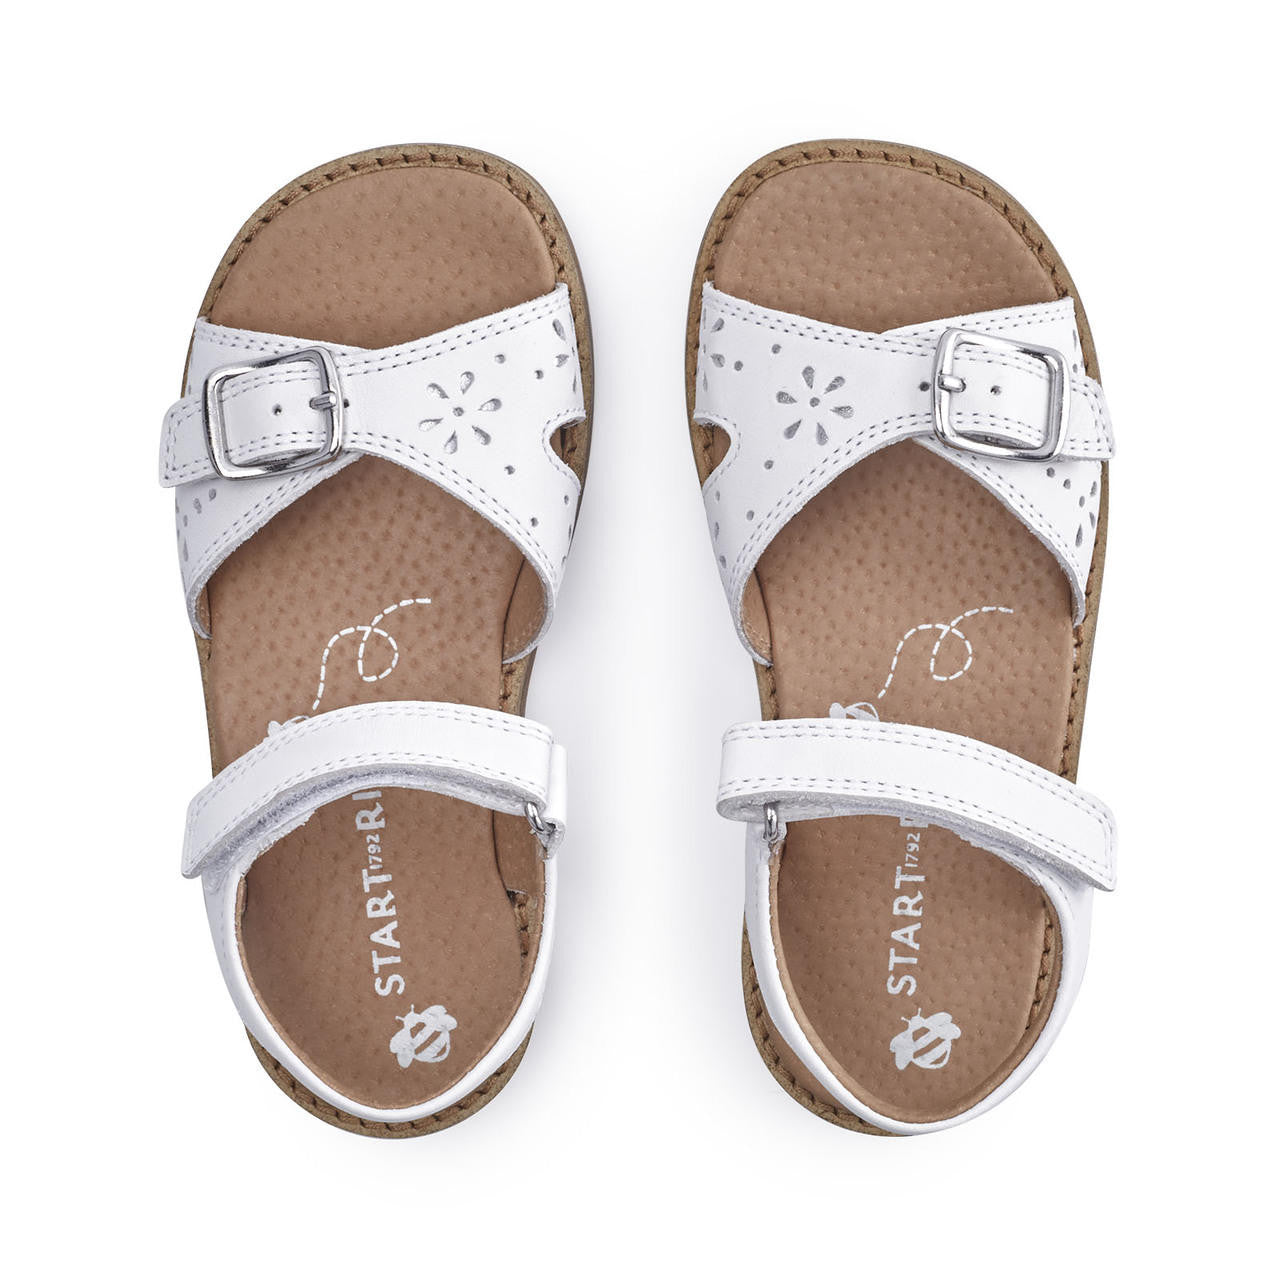 A pair of girls open toe sandals by Start Rite, style Holiday in white leather with Velcro fastening. Above view.